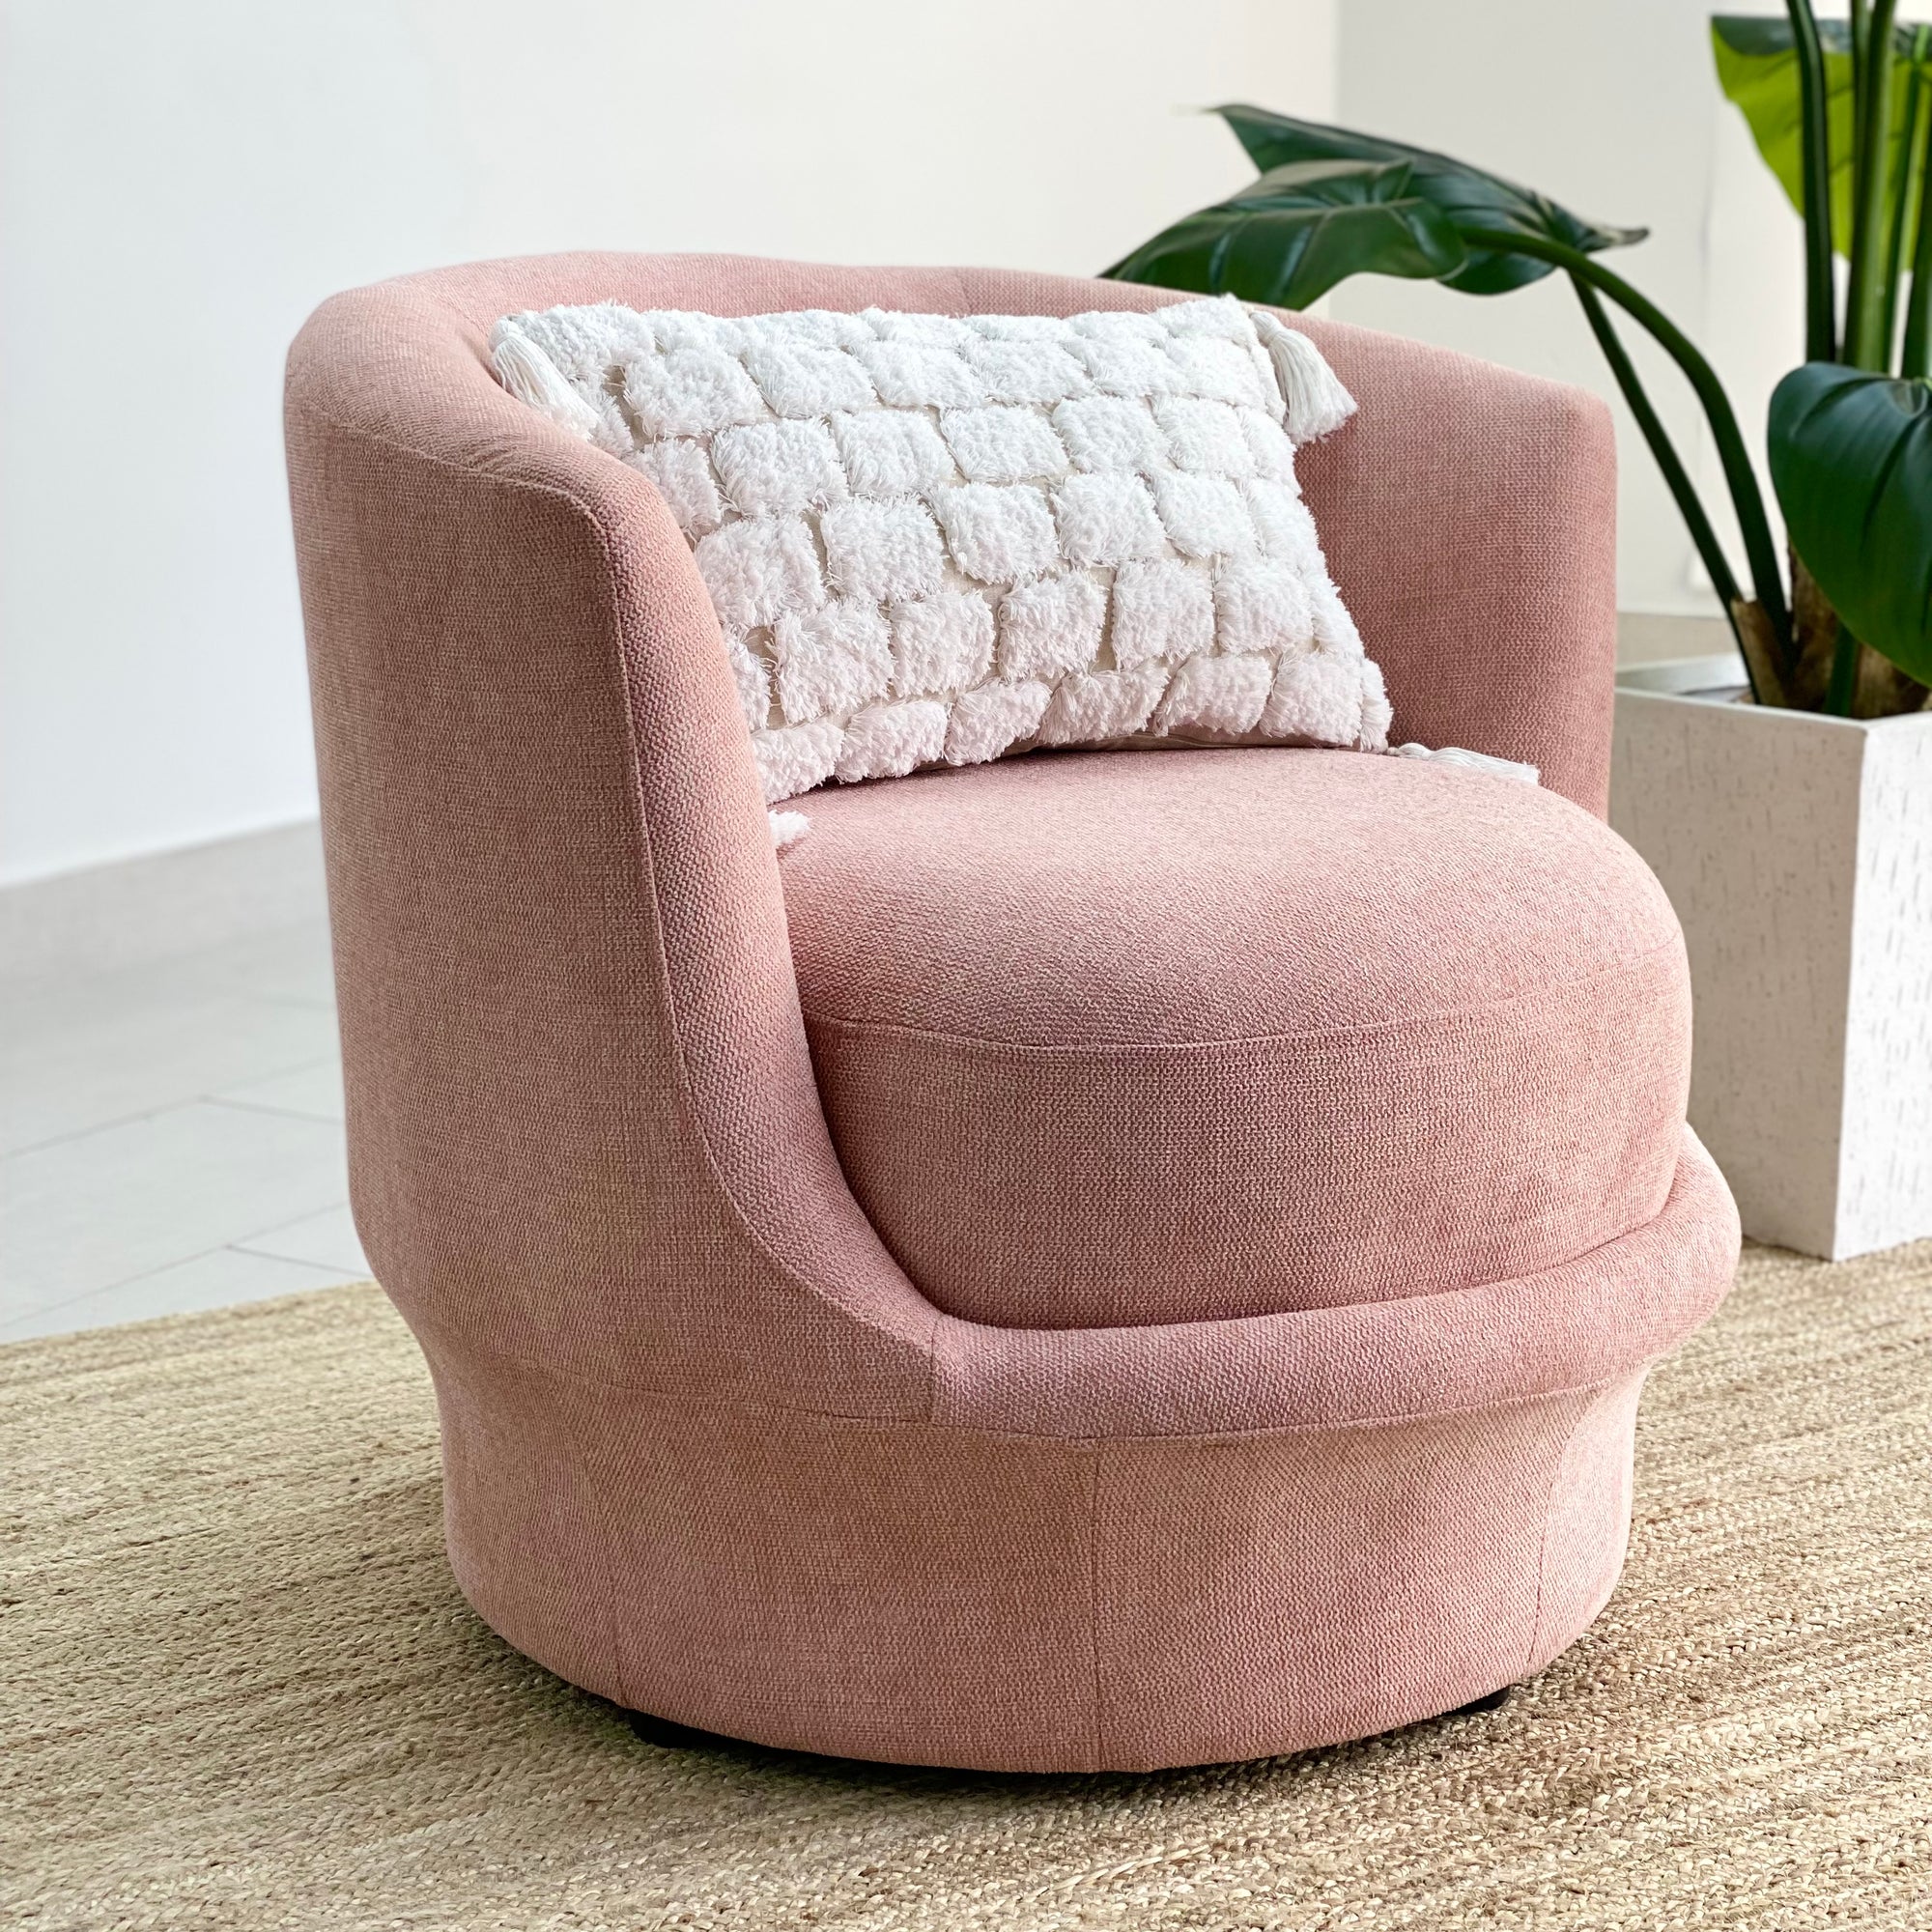 Cozy Round Pink Chair